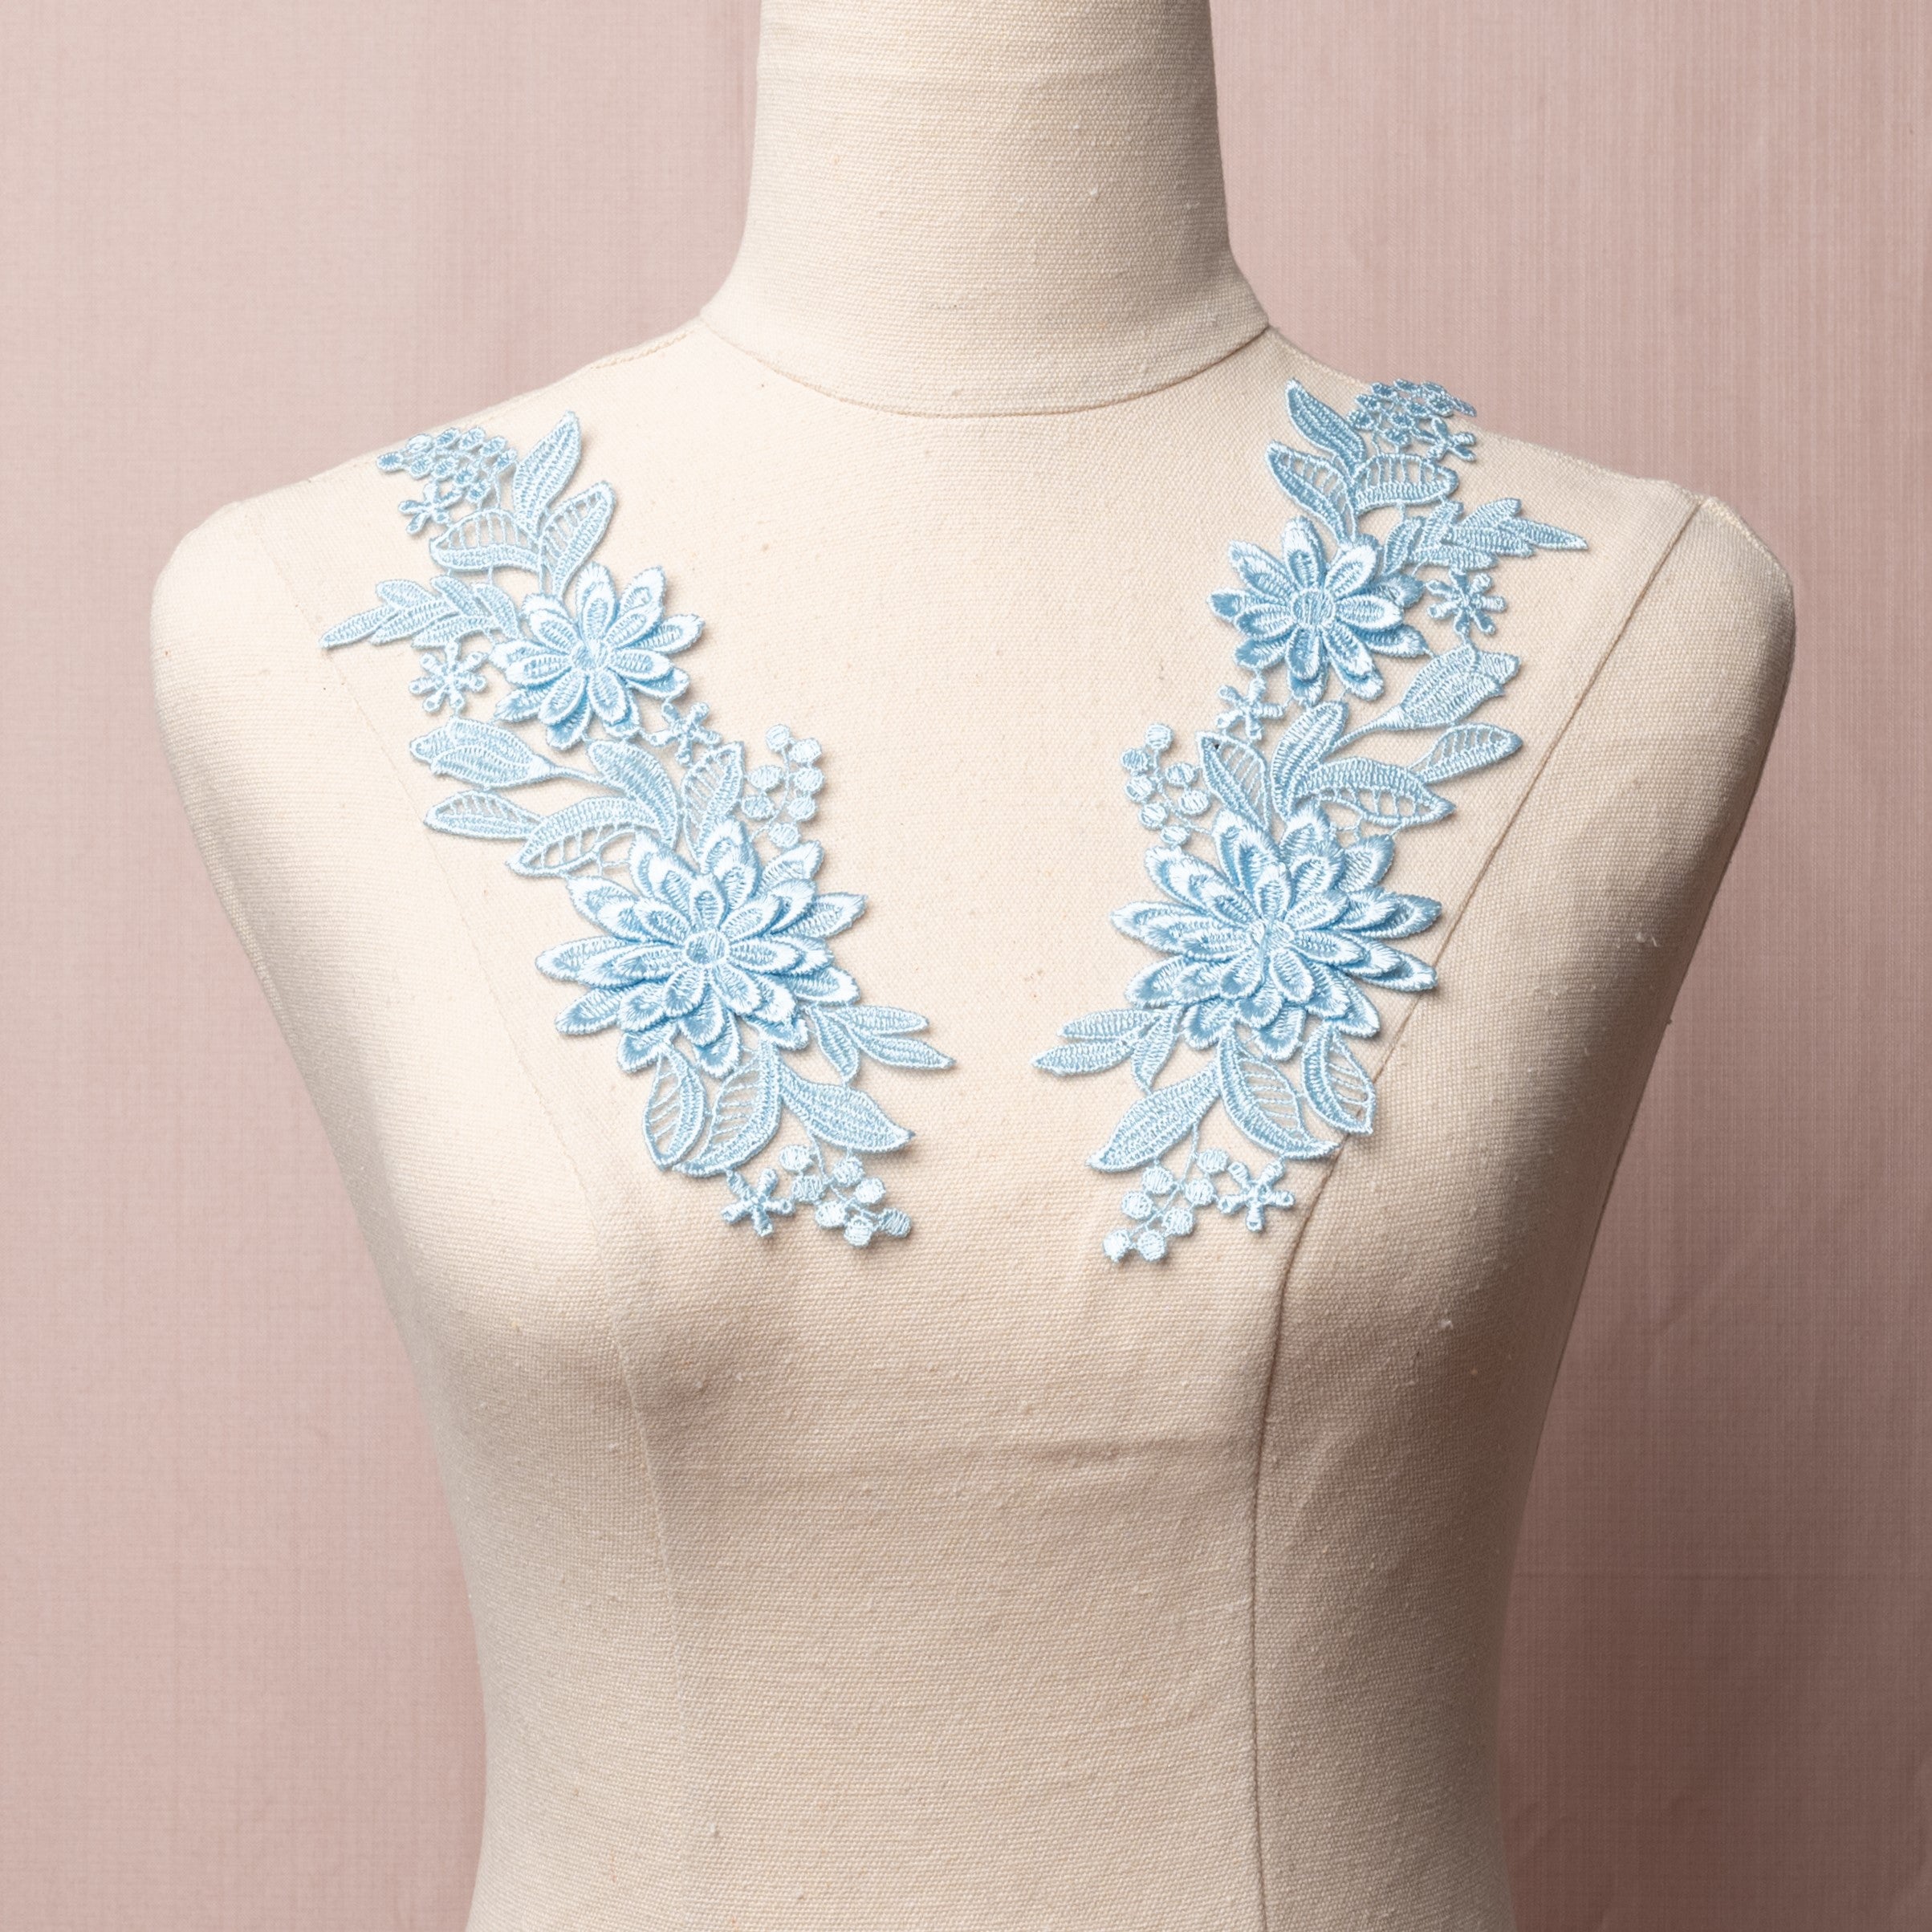 Baby blue lace applique with 3D flowers on an embroidered lace background. The appliques are displayed on a mannequin. 